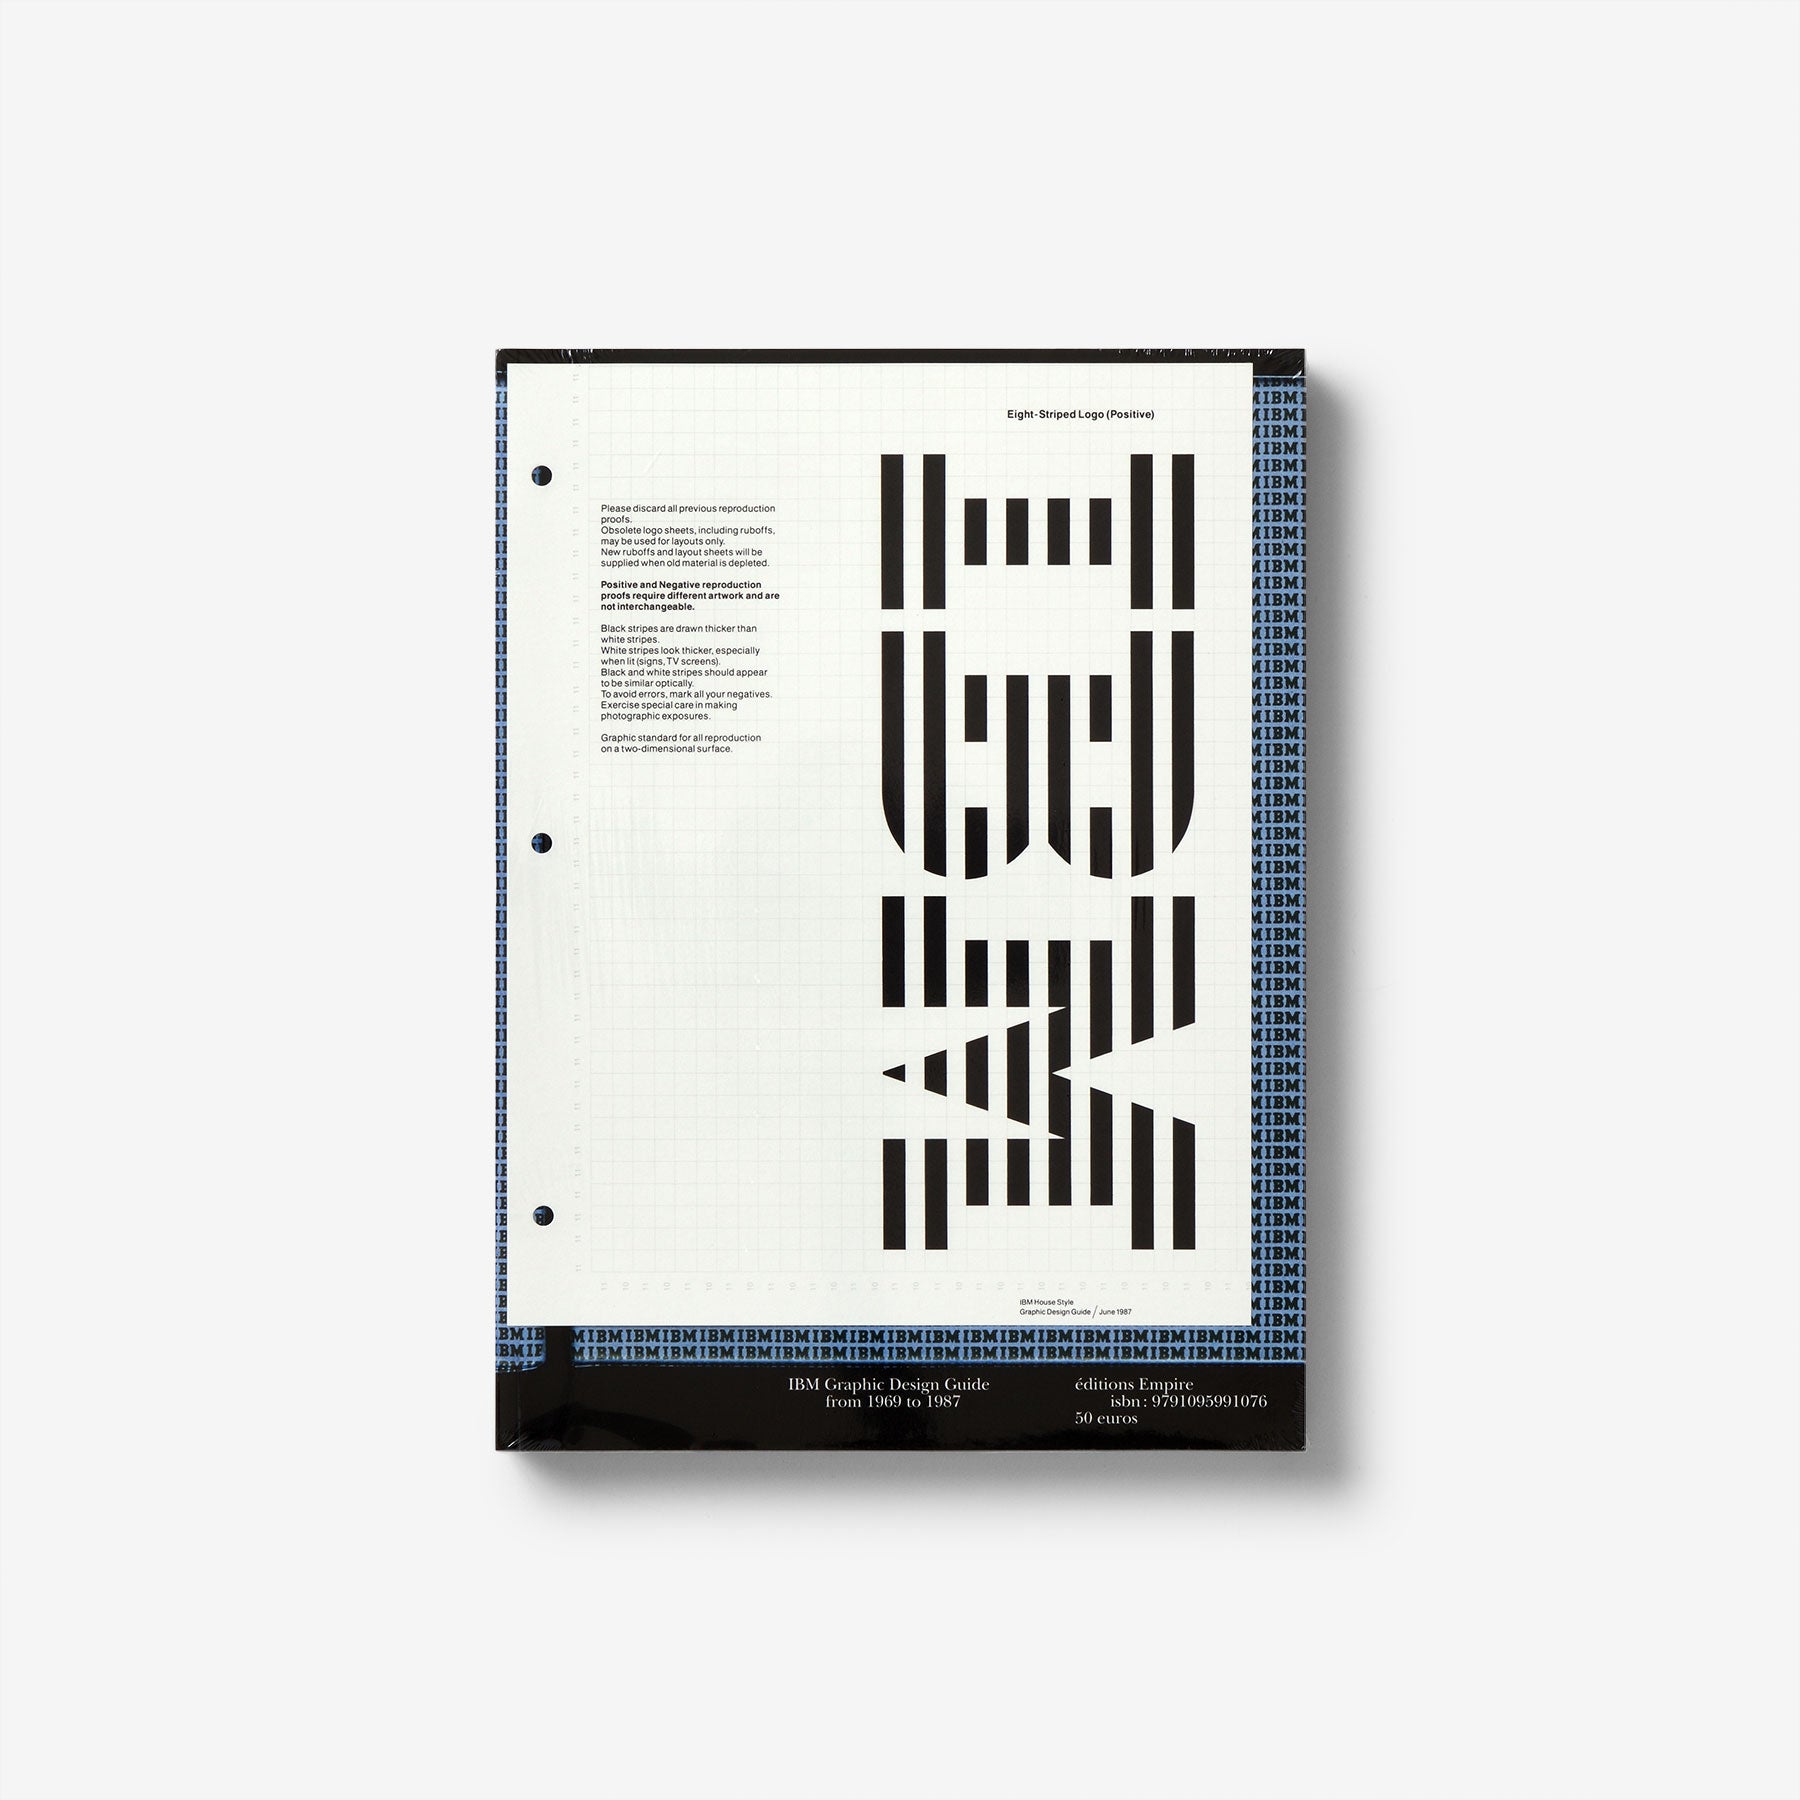 IBM: Graphic Design Guide from 1969 to 1987 North East